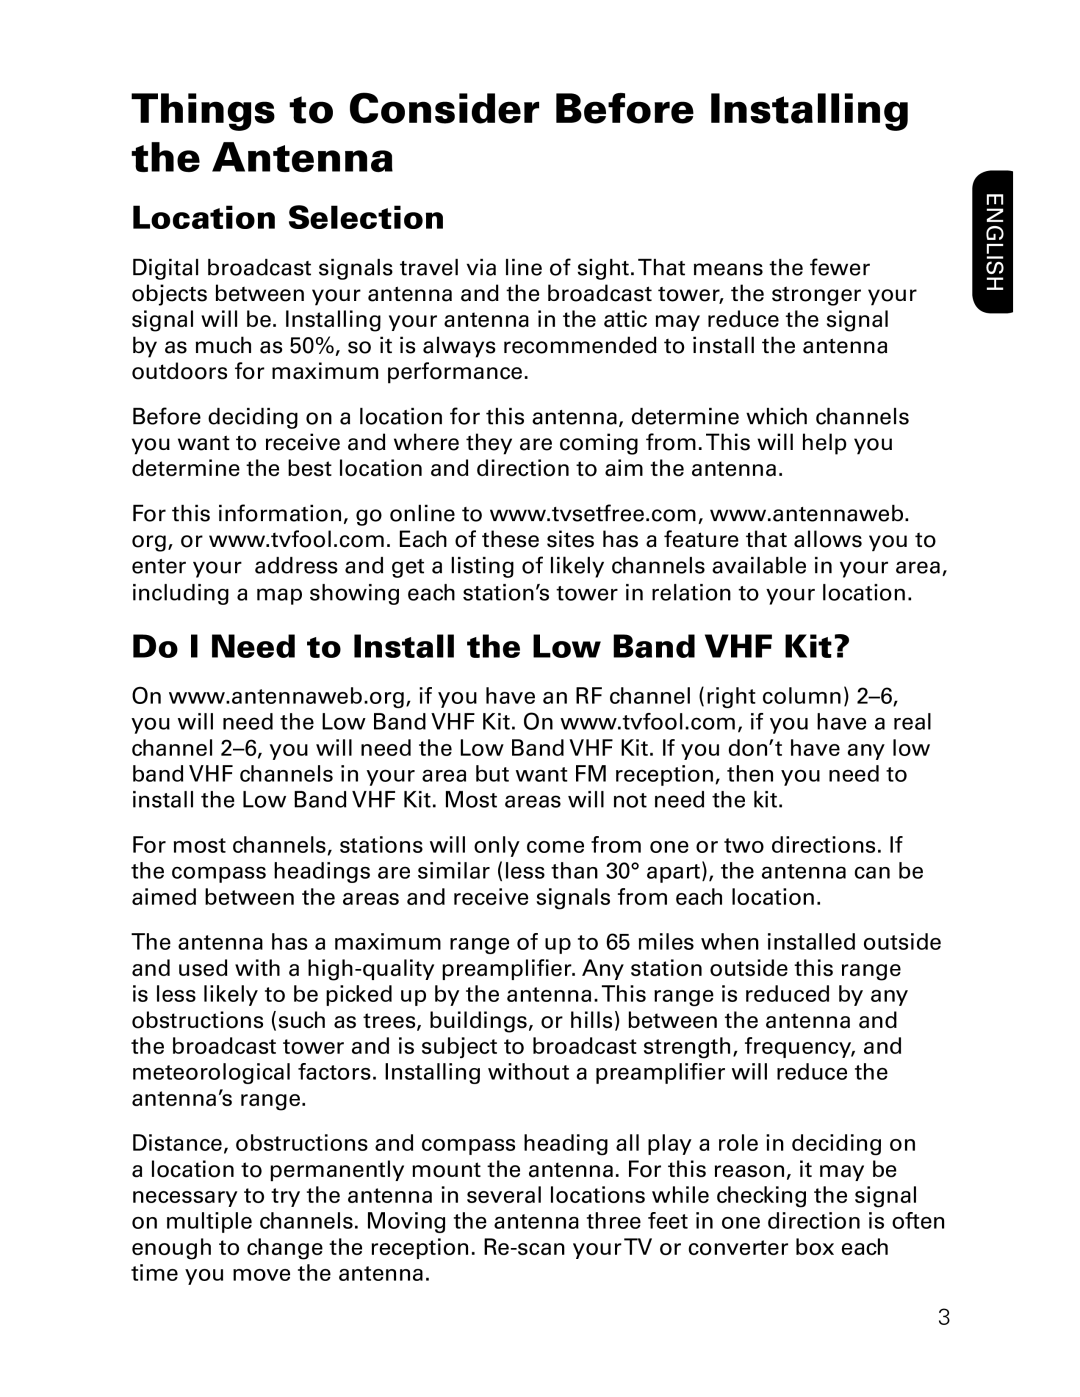 RCA ANT3037X installation manual Things to Consider Before Installing the Antenna, Location Selection, English 